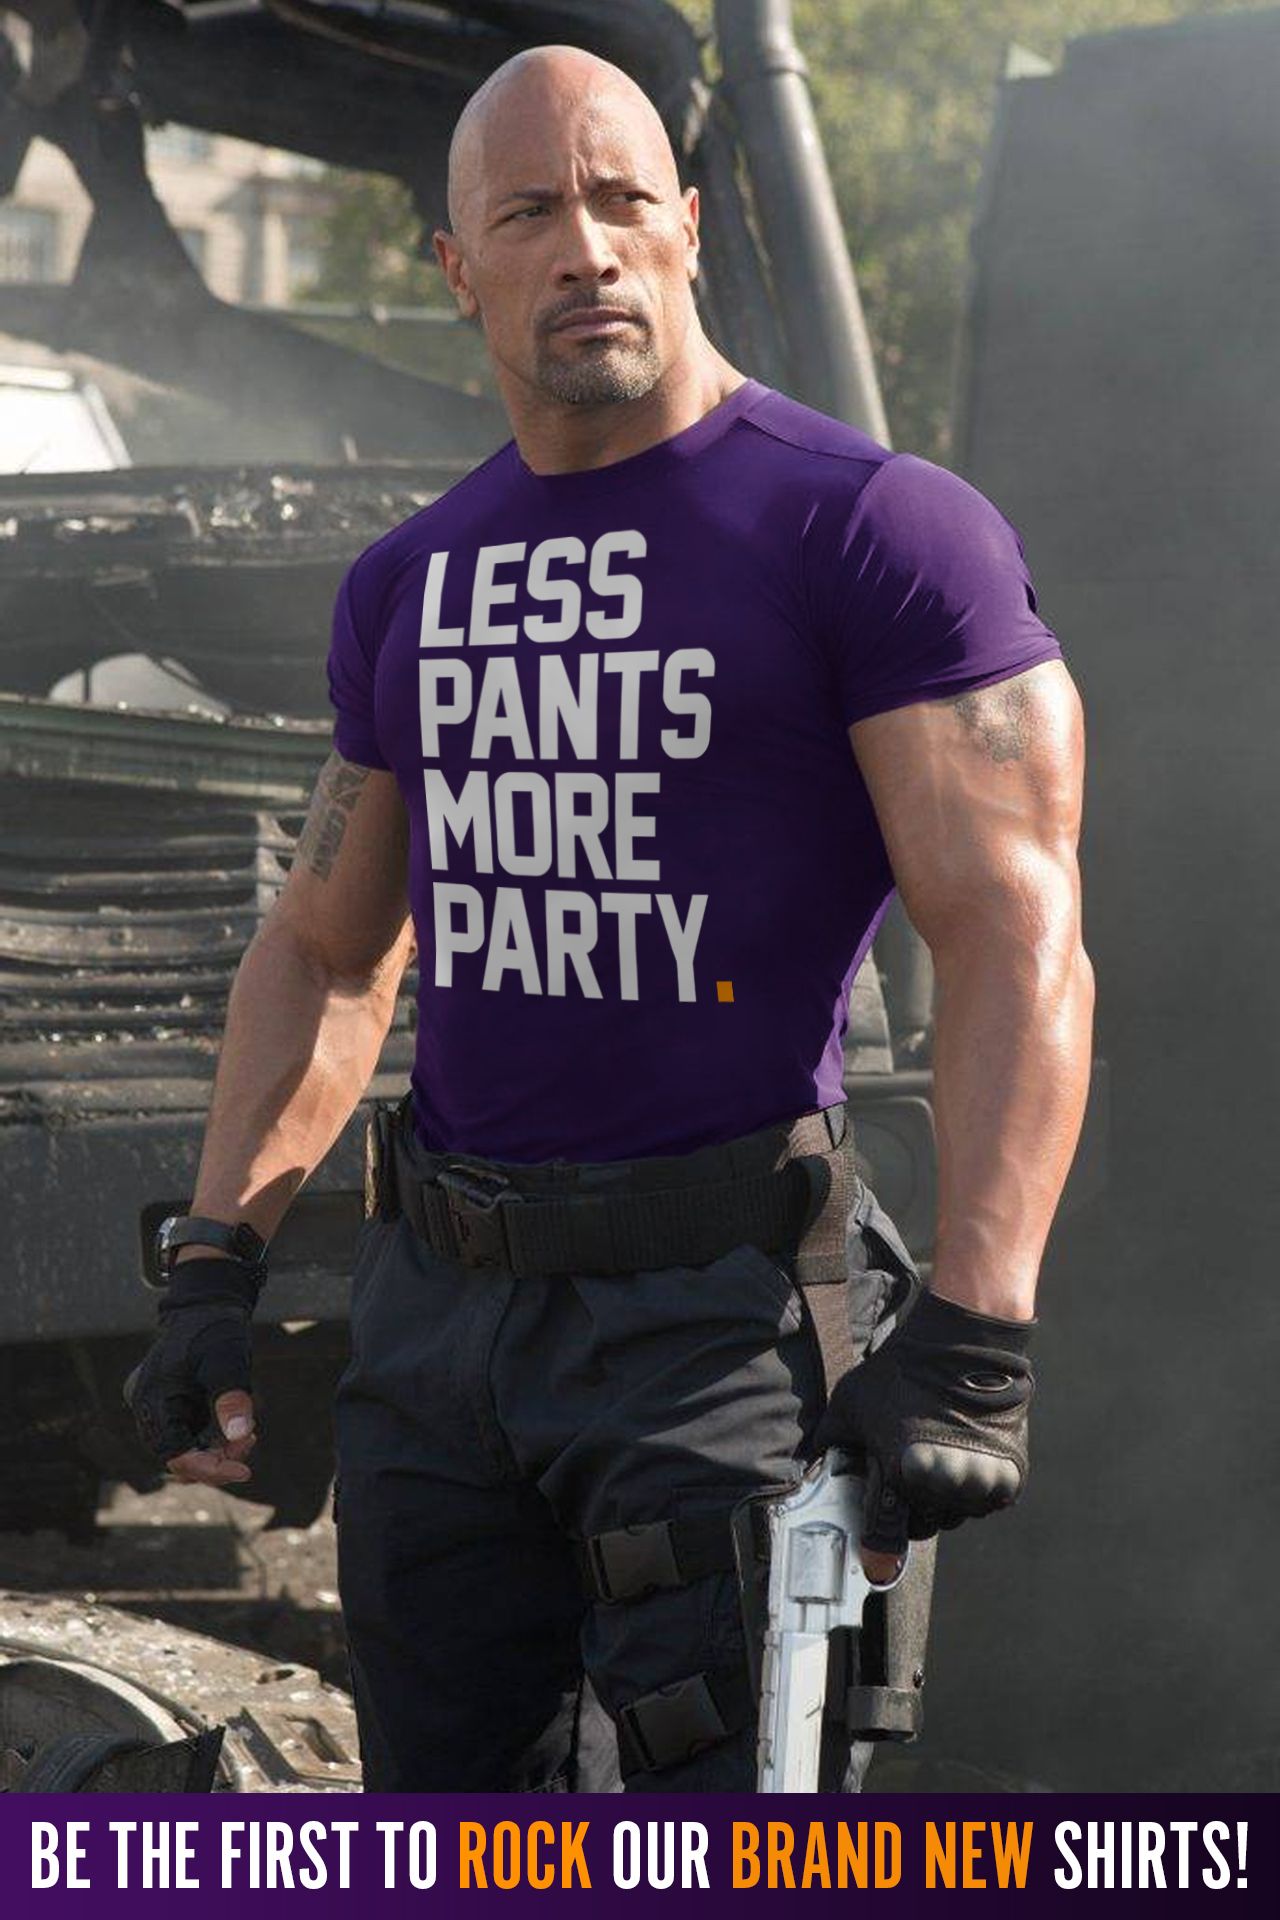 Party Pants - New shirts in stock now! Get em while you can! | Facebook